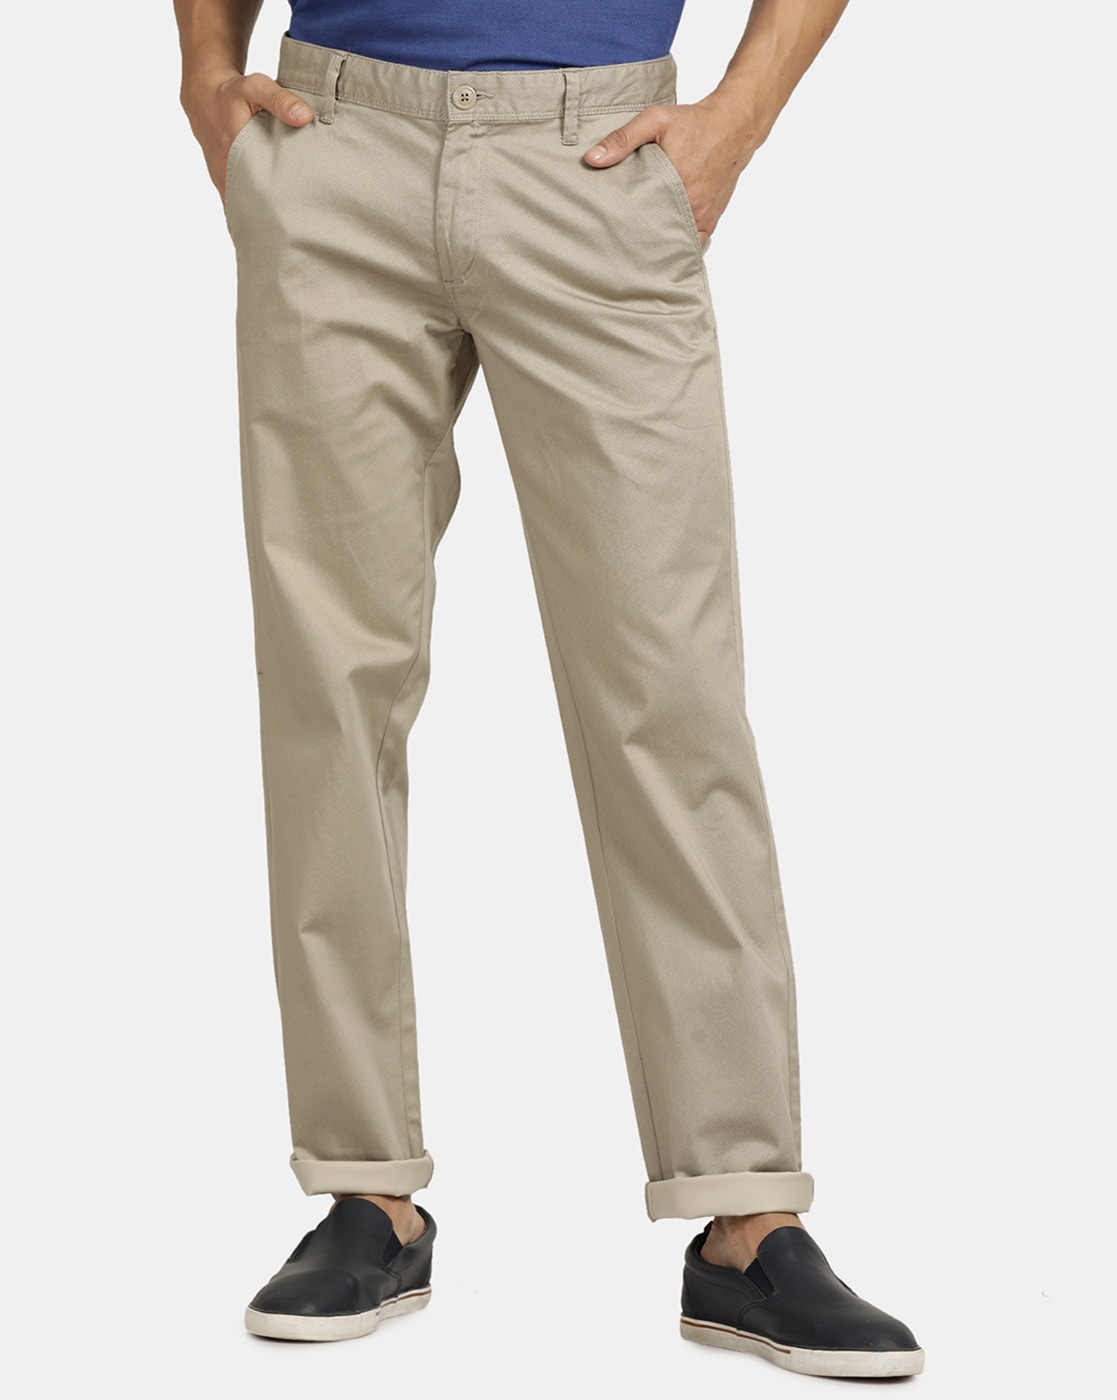 Buy FlatFront Trousers with Slant Pockets Online at Best Prices in India   JioMart